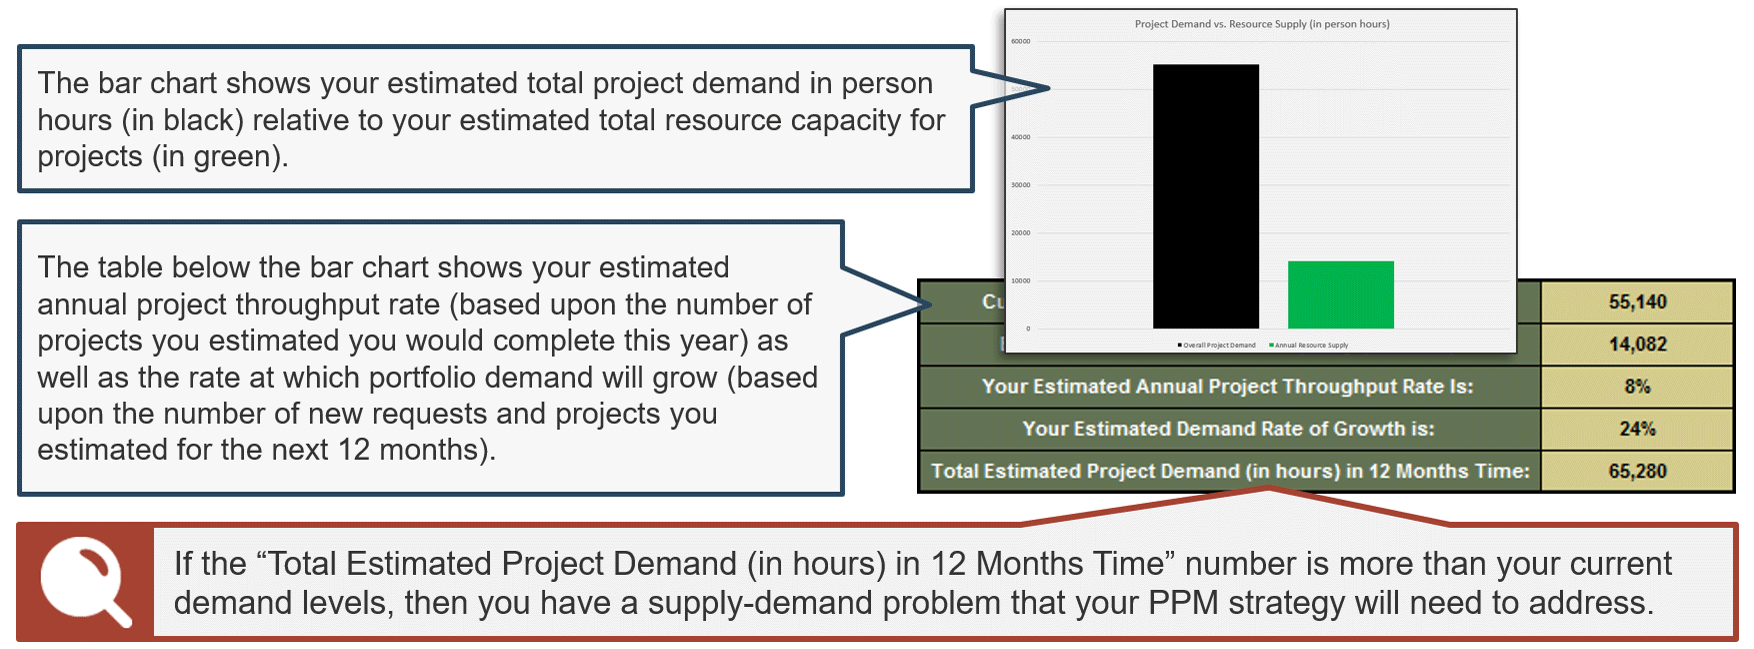 Screenshots of Tab 5 in the PPM High-Level Supply/Demand Calculator. A bar chart obscures a table with the note 'The bar chart shows your estimated total project demand in person hours (in black) relative to your estimated total resource capacity for projects (in green)'. Notes on the table are 'The table below the bar chart shows your estimated annual project throughput rate (based upon the number of projects you estimated you would complete this year) as well as the rate at which portfolio demand will grow (based upon the number of new requests and projects you estimated for the next 12 months)' and 'If the “Total Estimated Project Demand (in hours) in 12 Months Time” number is more than your current demand levels, then you have a supply-demand problem that your PPM strategy will need to address'.